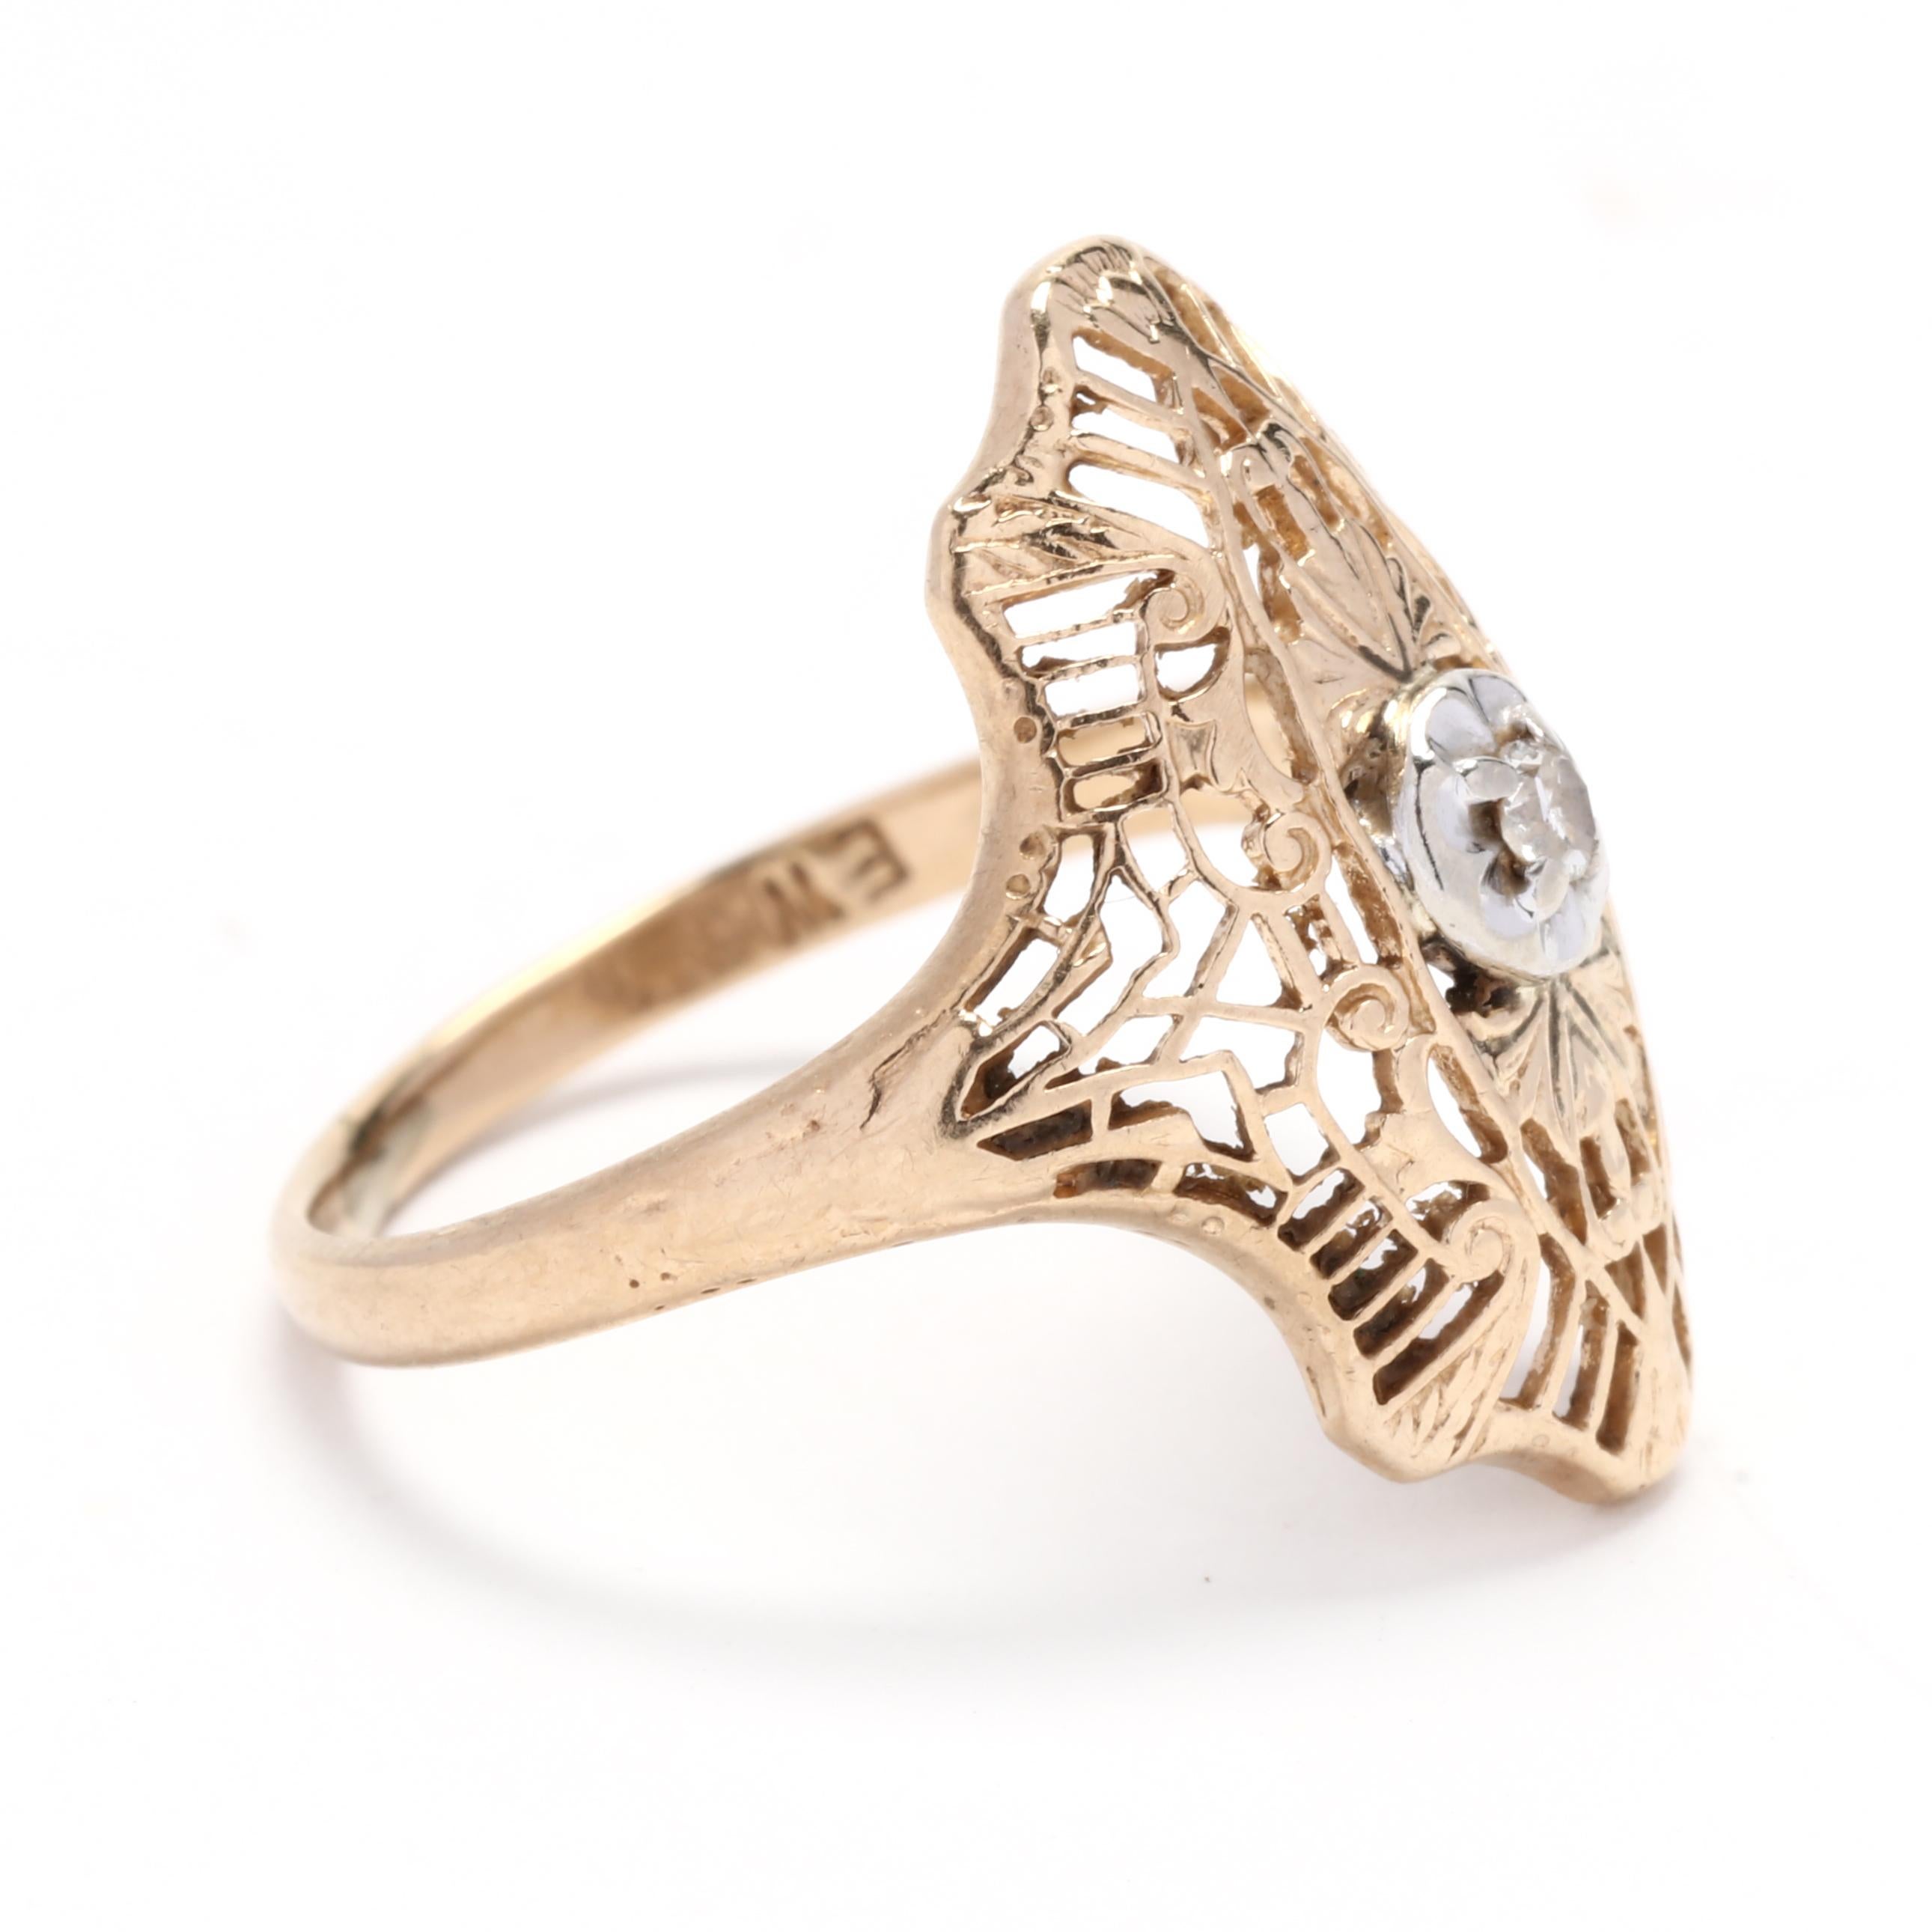 This vintage diamond filigree ring is a stunning piece crafted from 10k yellow and white gold. The intricate filigree design adds a touch of elegance and vintage charm to the ring, making it a timeless and unique piece of jewelry. The center of the